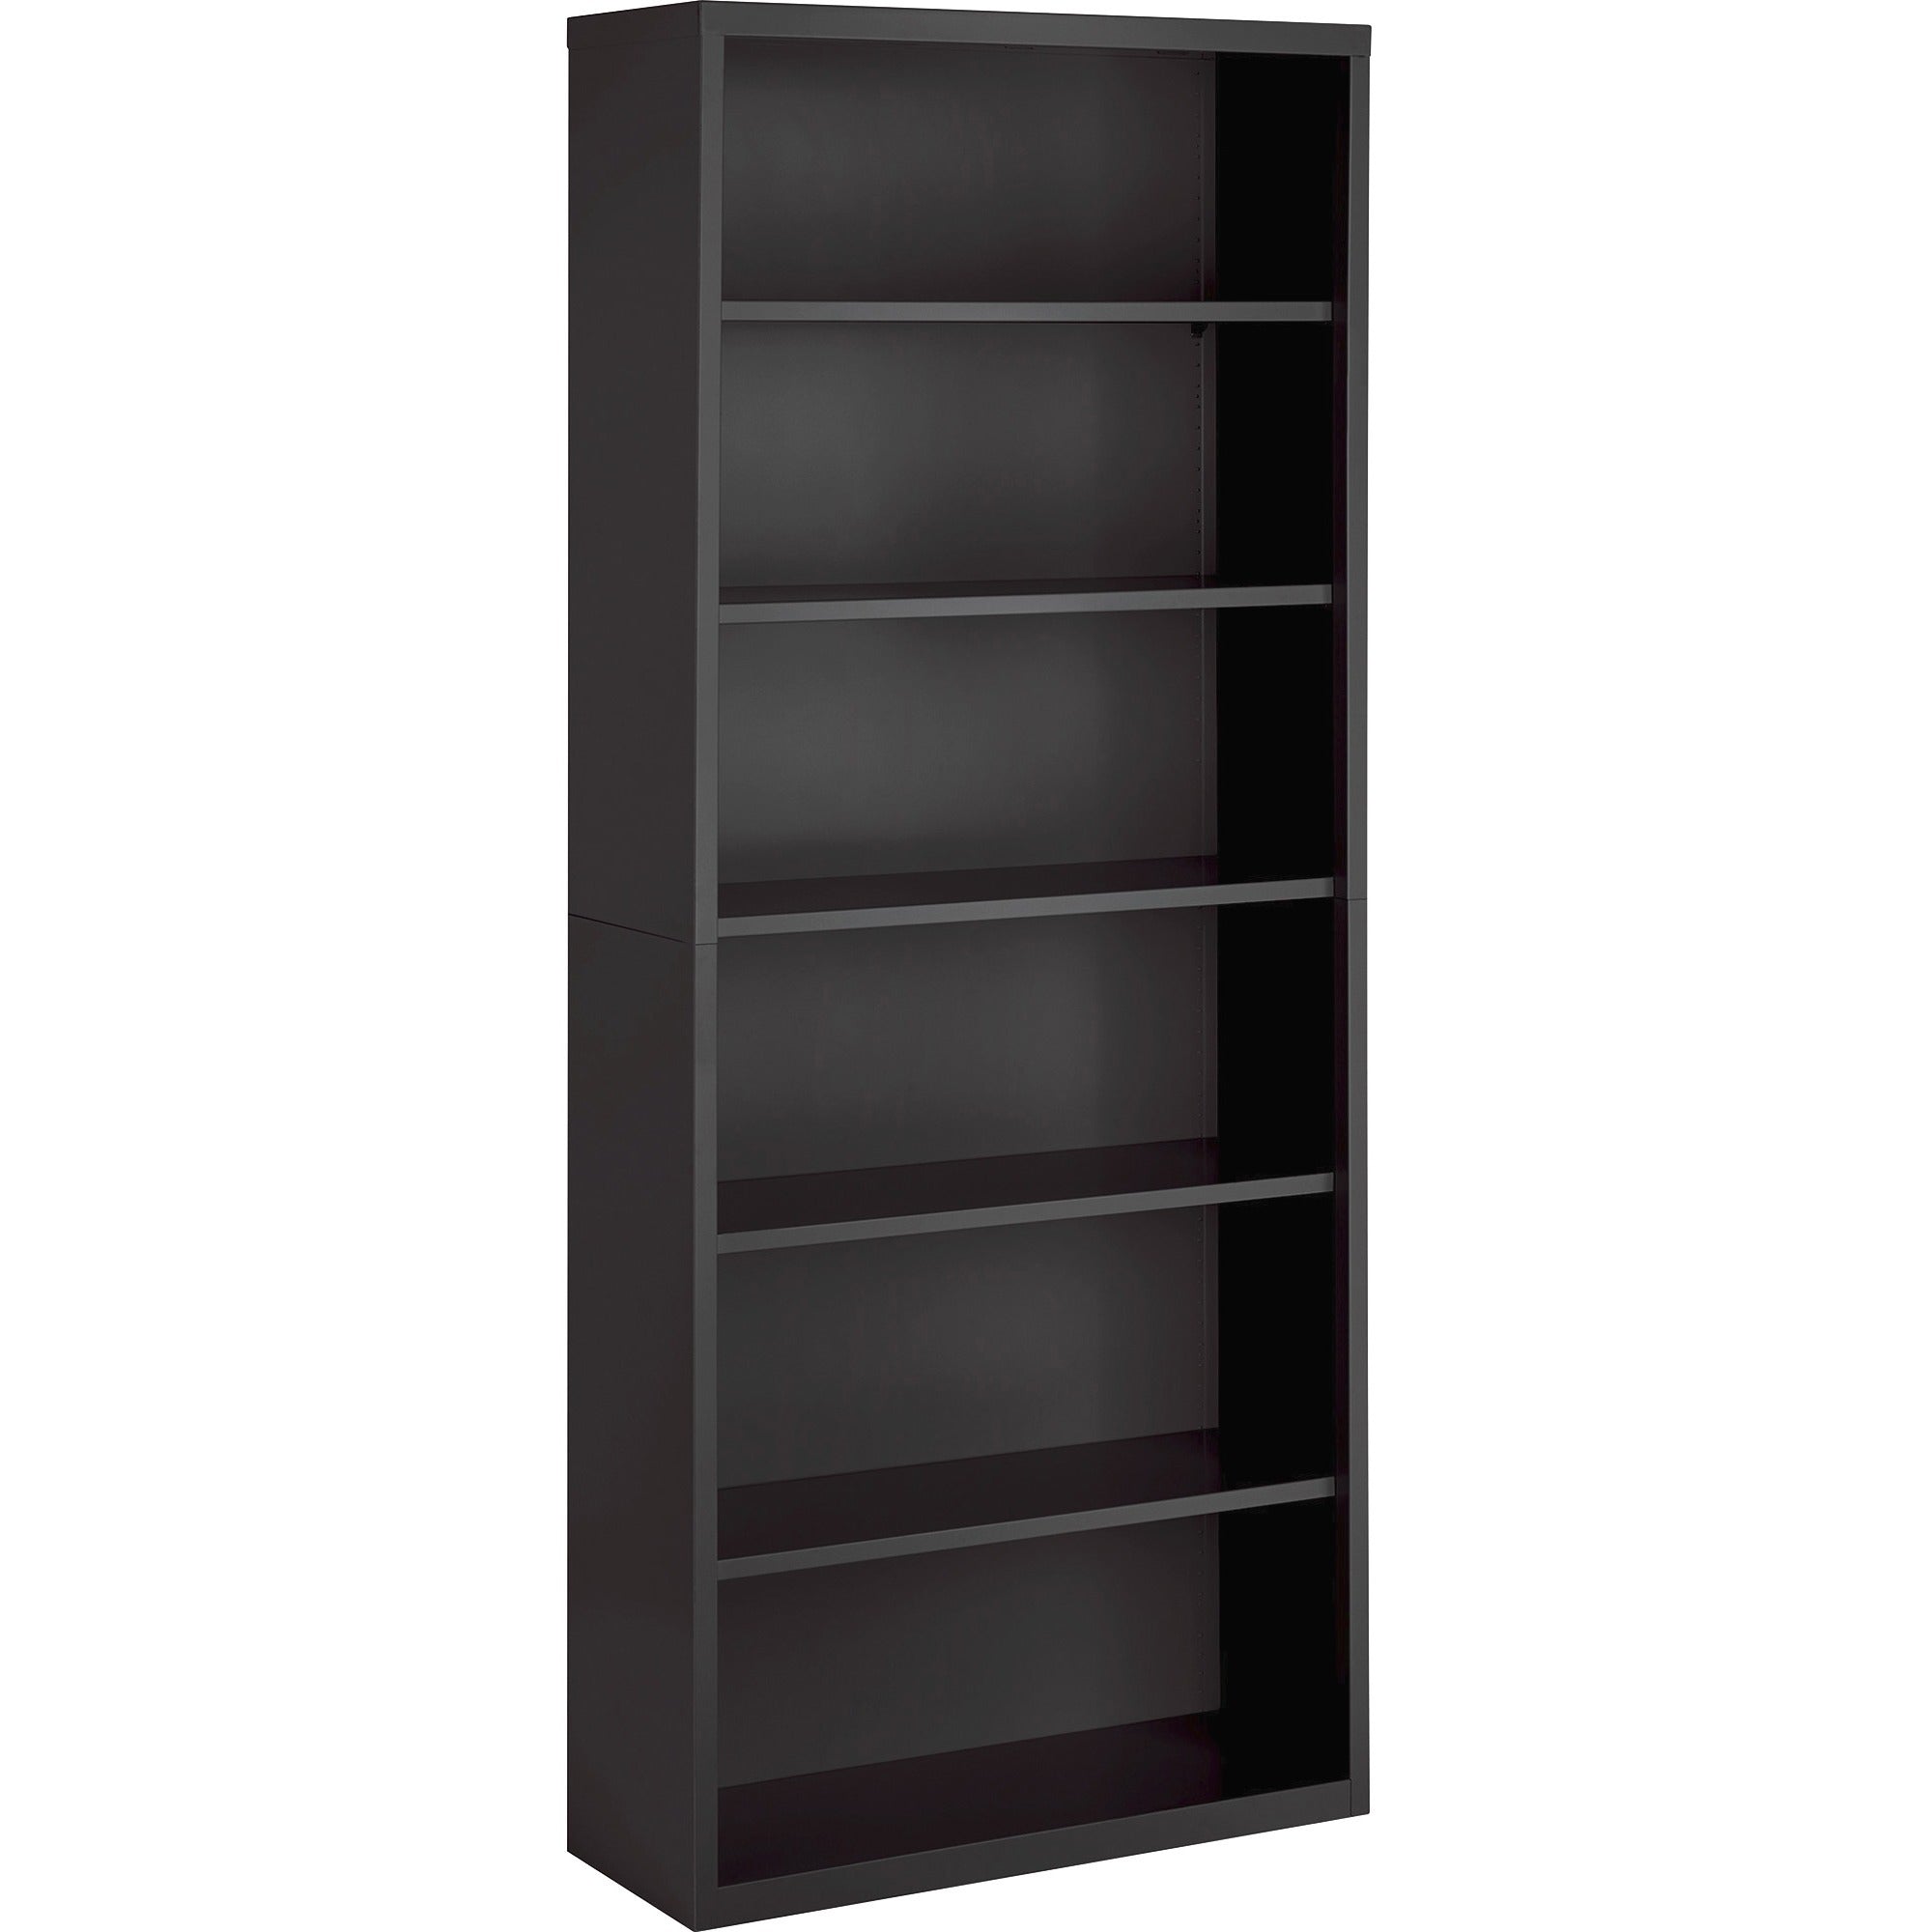 lorell-fortress-series-bookcase-345-x-1382-6-shelves-material-steel-finish-charcoal-powder-coated-adjustable-shelf-welded-durable_llr59695 - 1